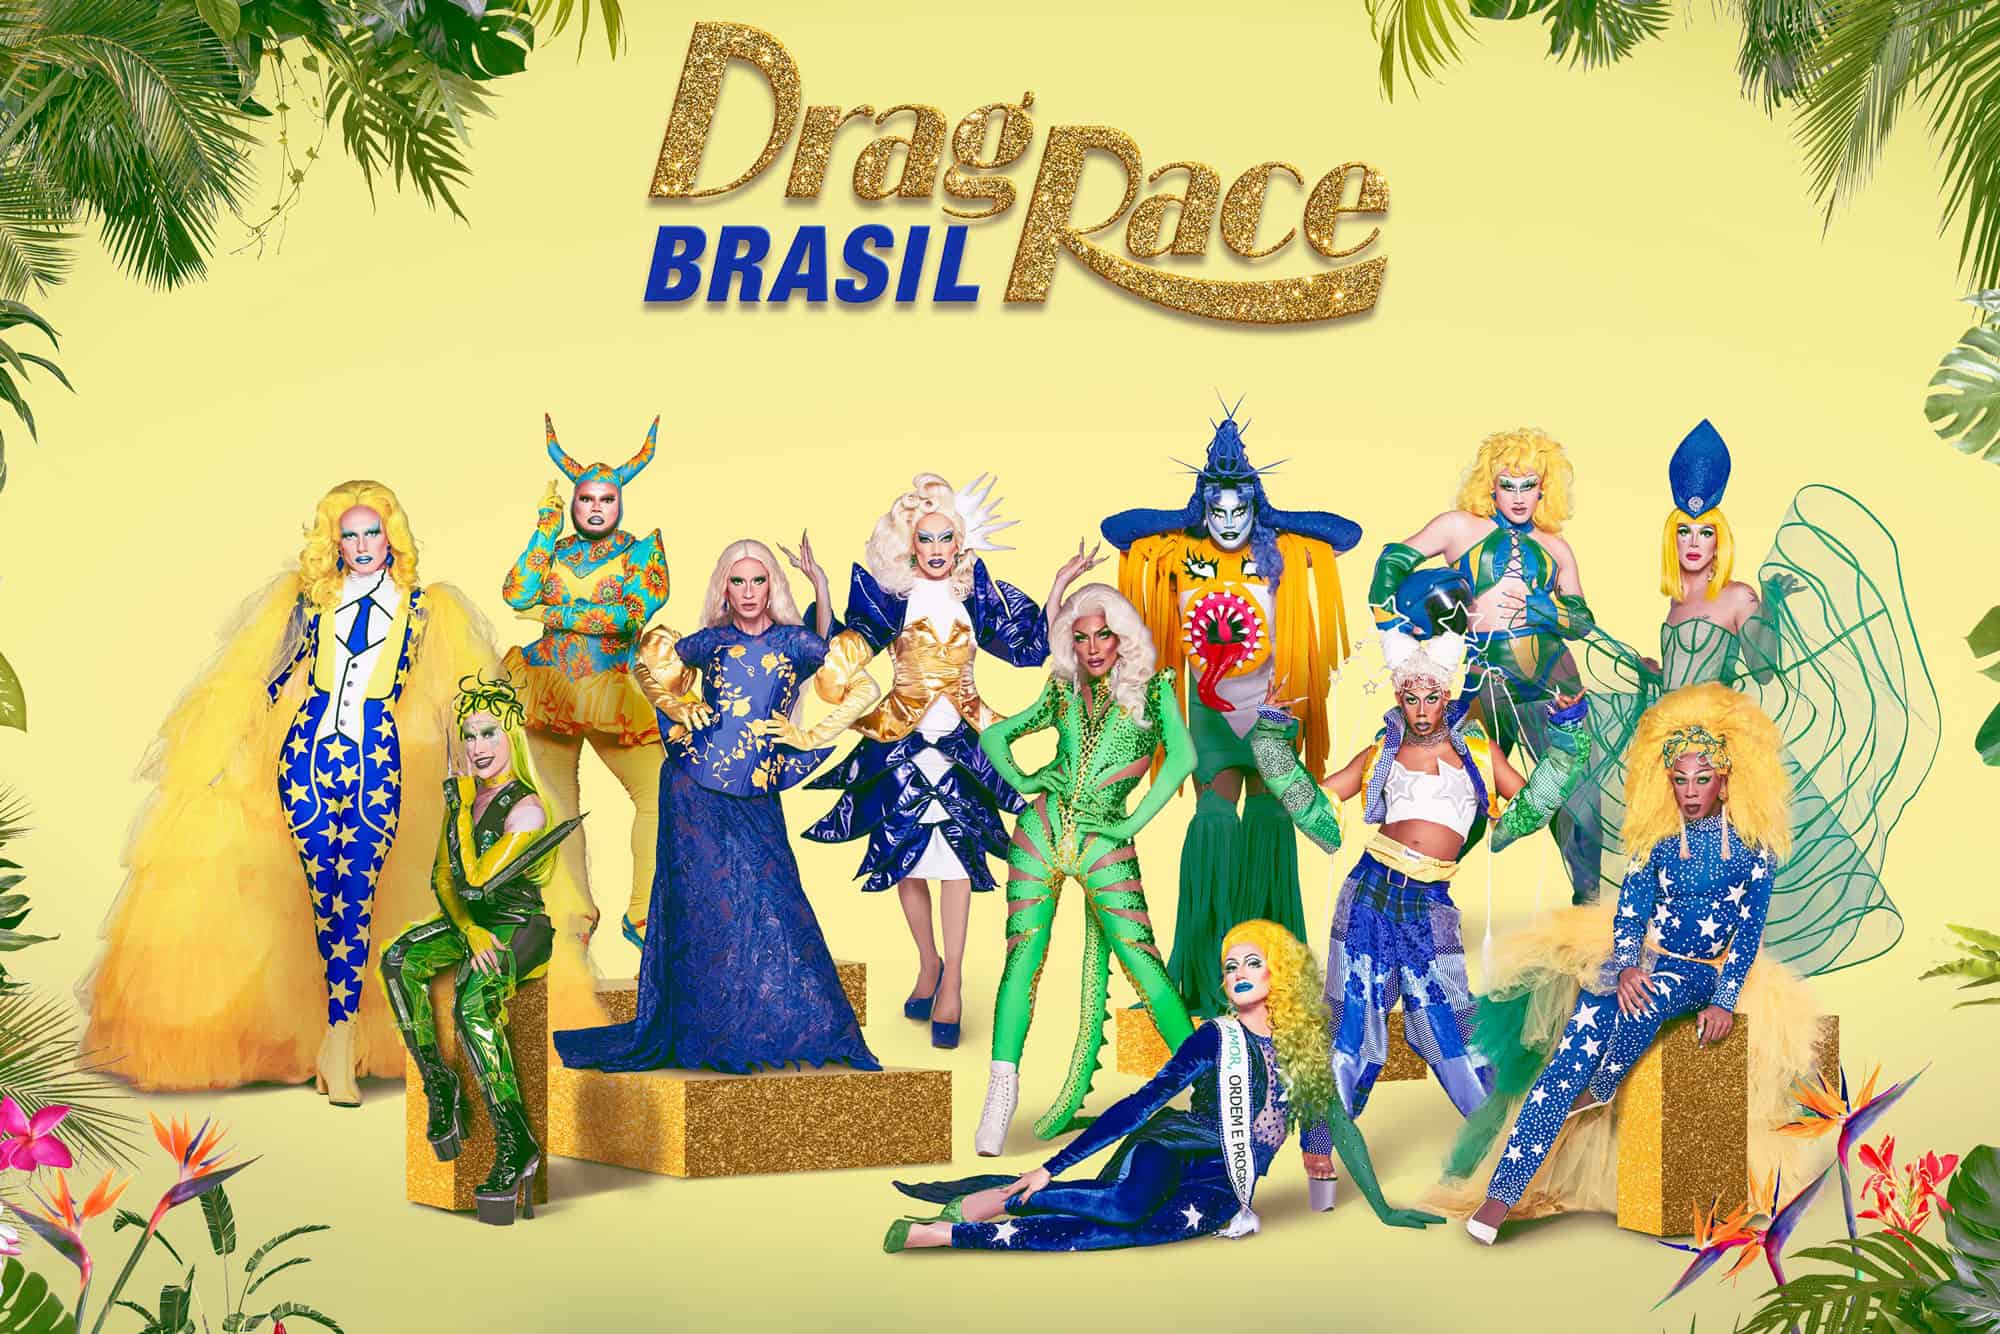 The contestants for the show, Drag Race Brasil (Credits: MTV)